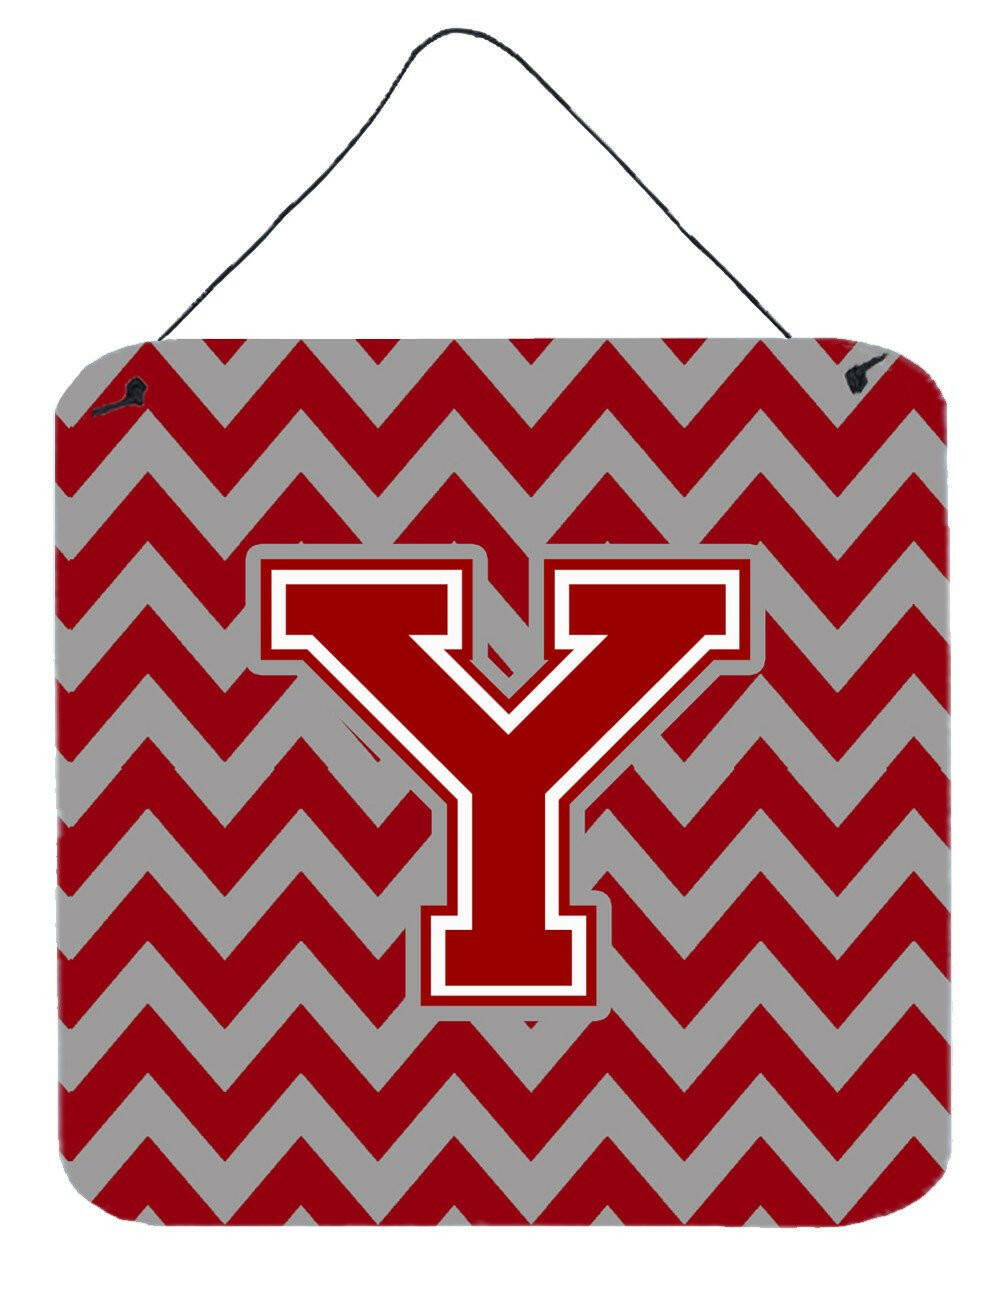 Letter Y Chevron Maroon and White Wall or Door Hanging Prints CJ1049-YDS66 by Caroline's Treasures